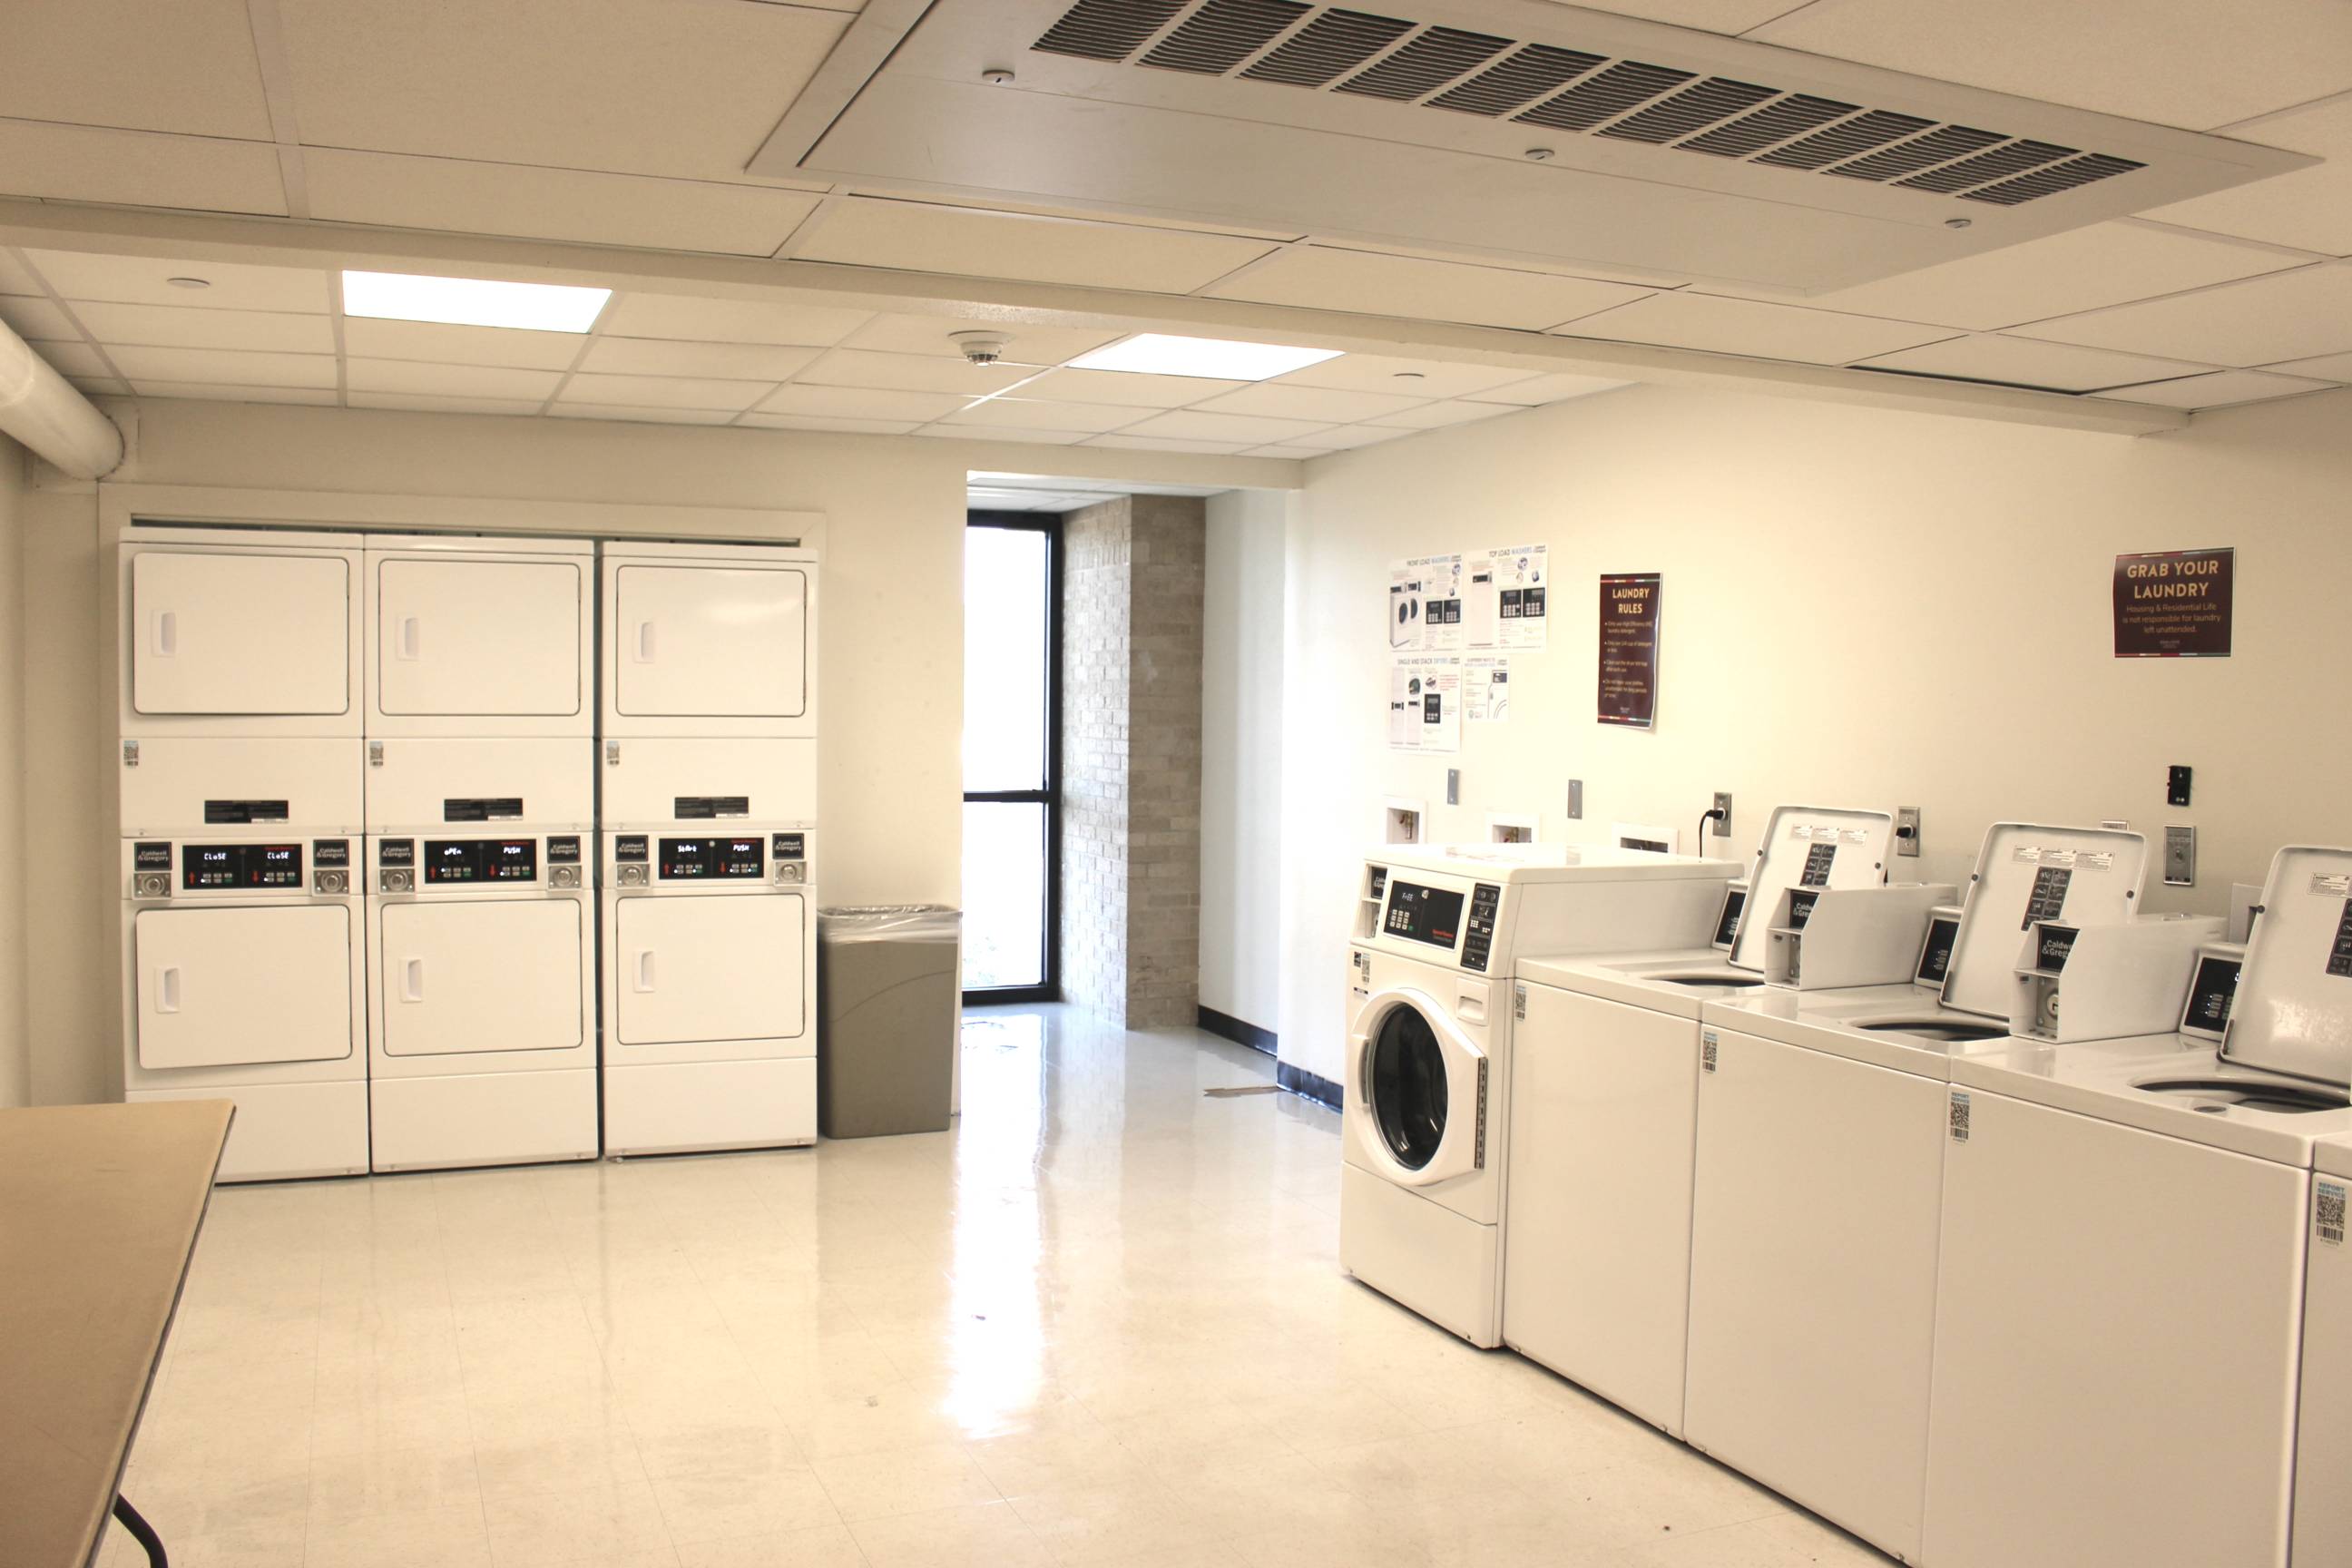 Laundry  Housing & Residential Life